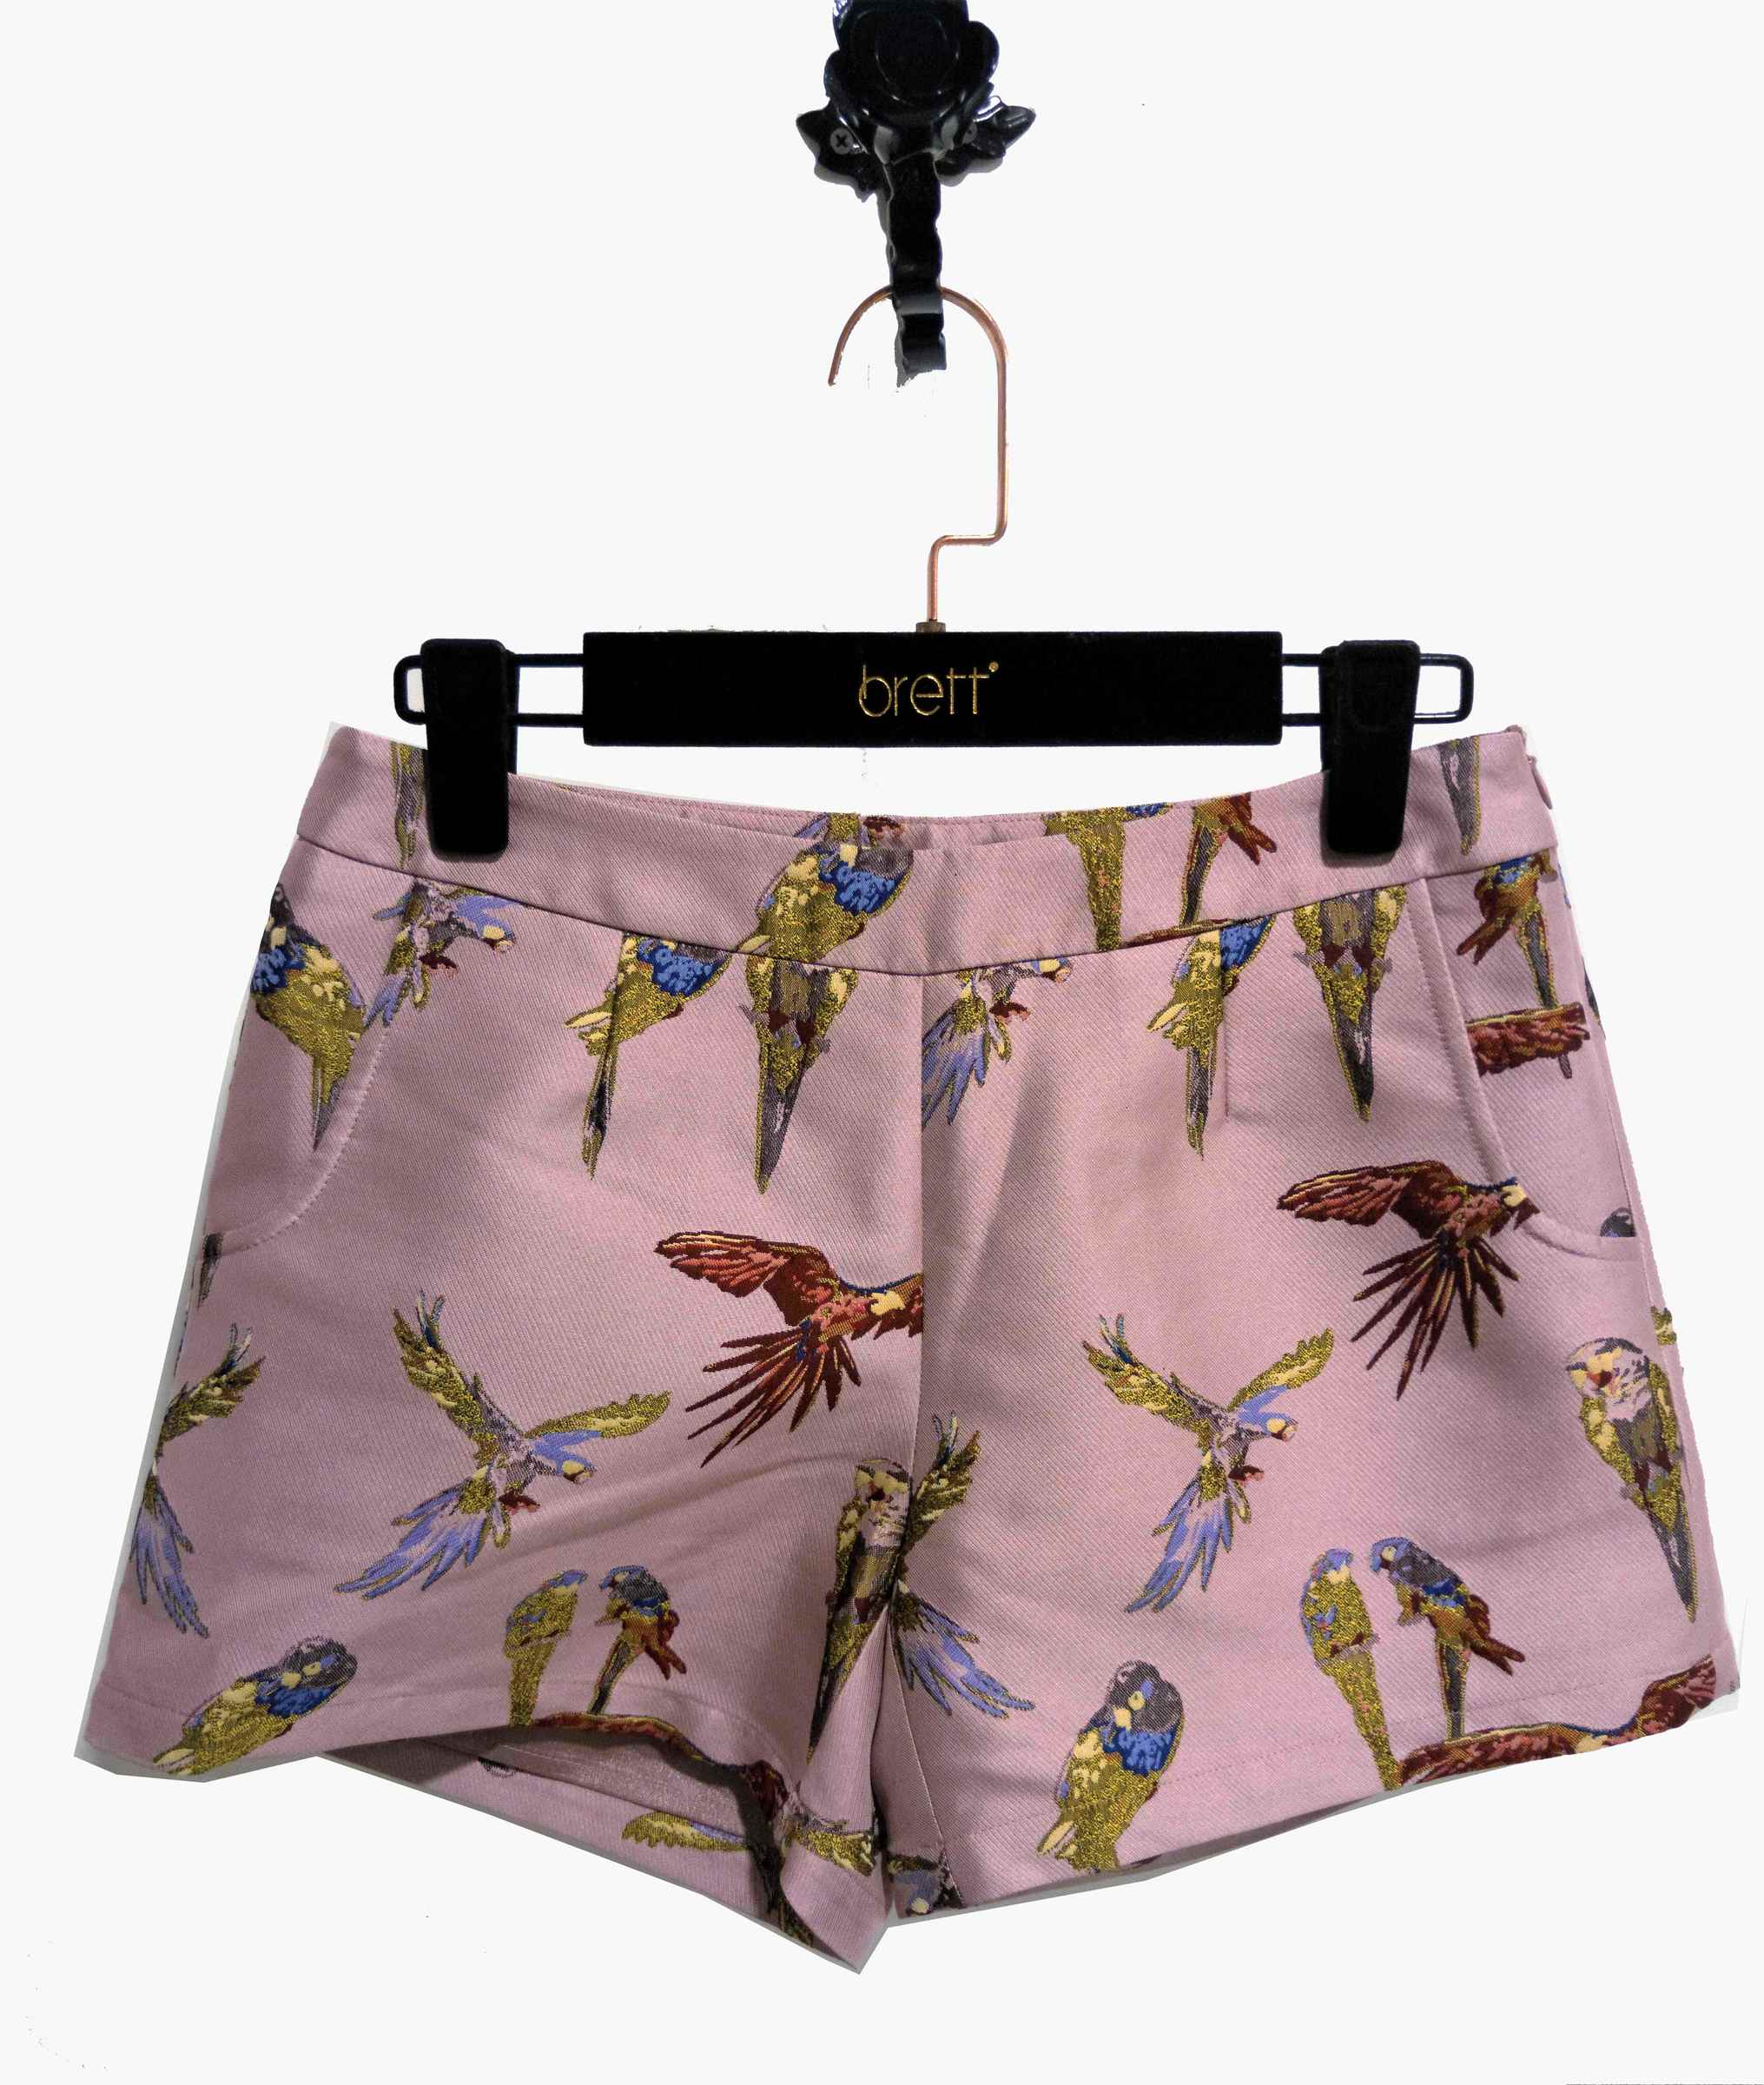 Latest shorts for fashion embroidered pink ladies shorts with spring design hot pants (Copy).jpg